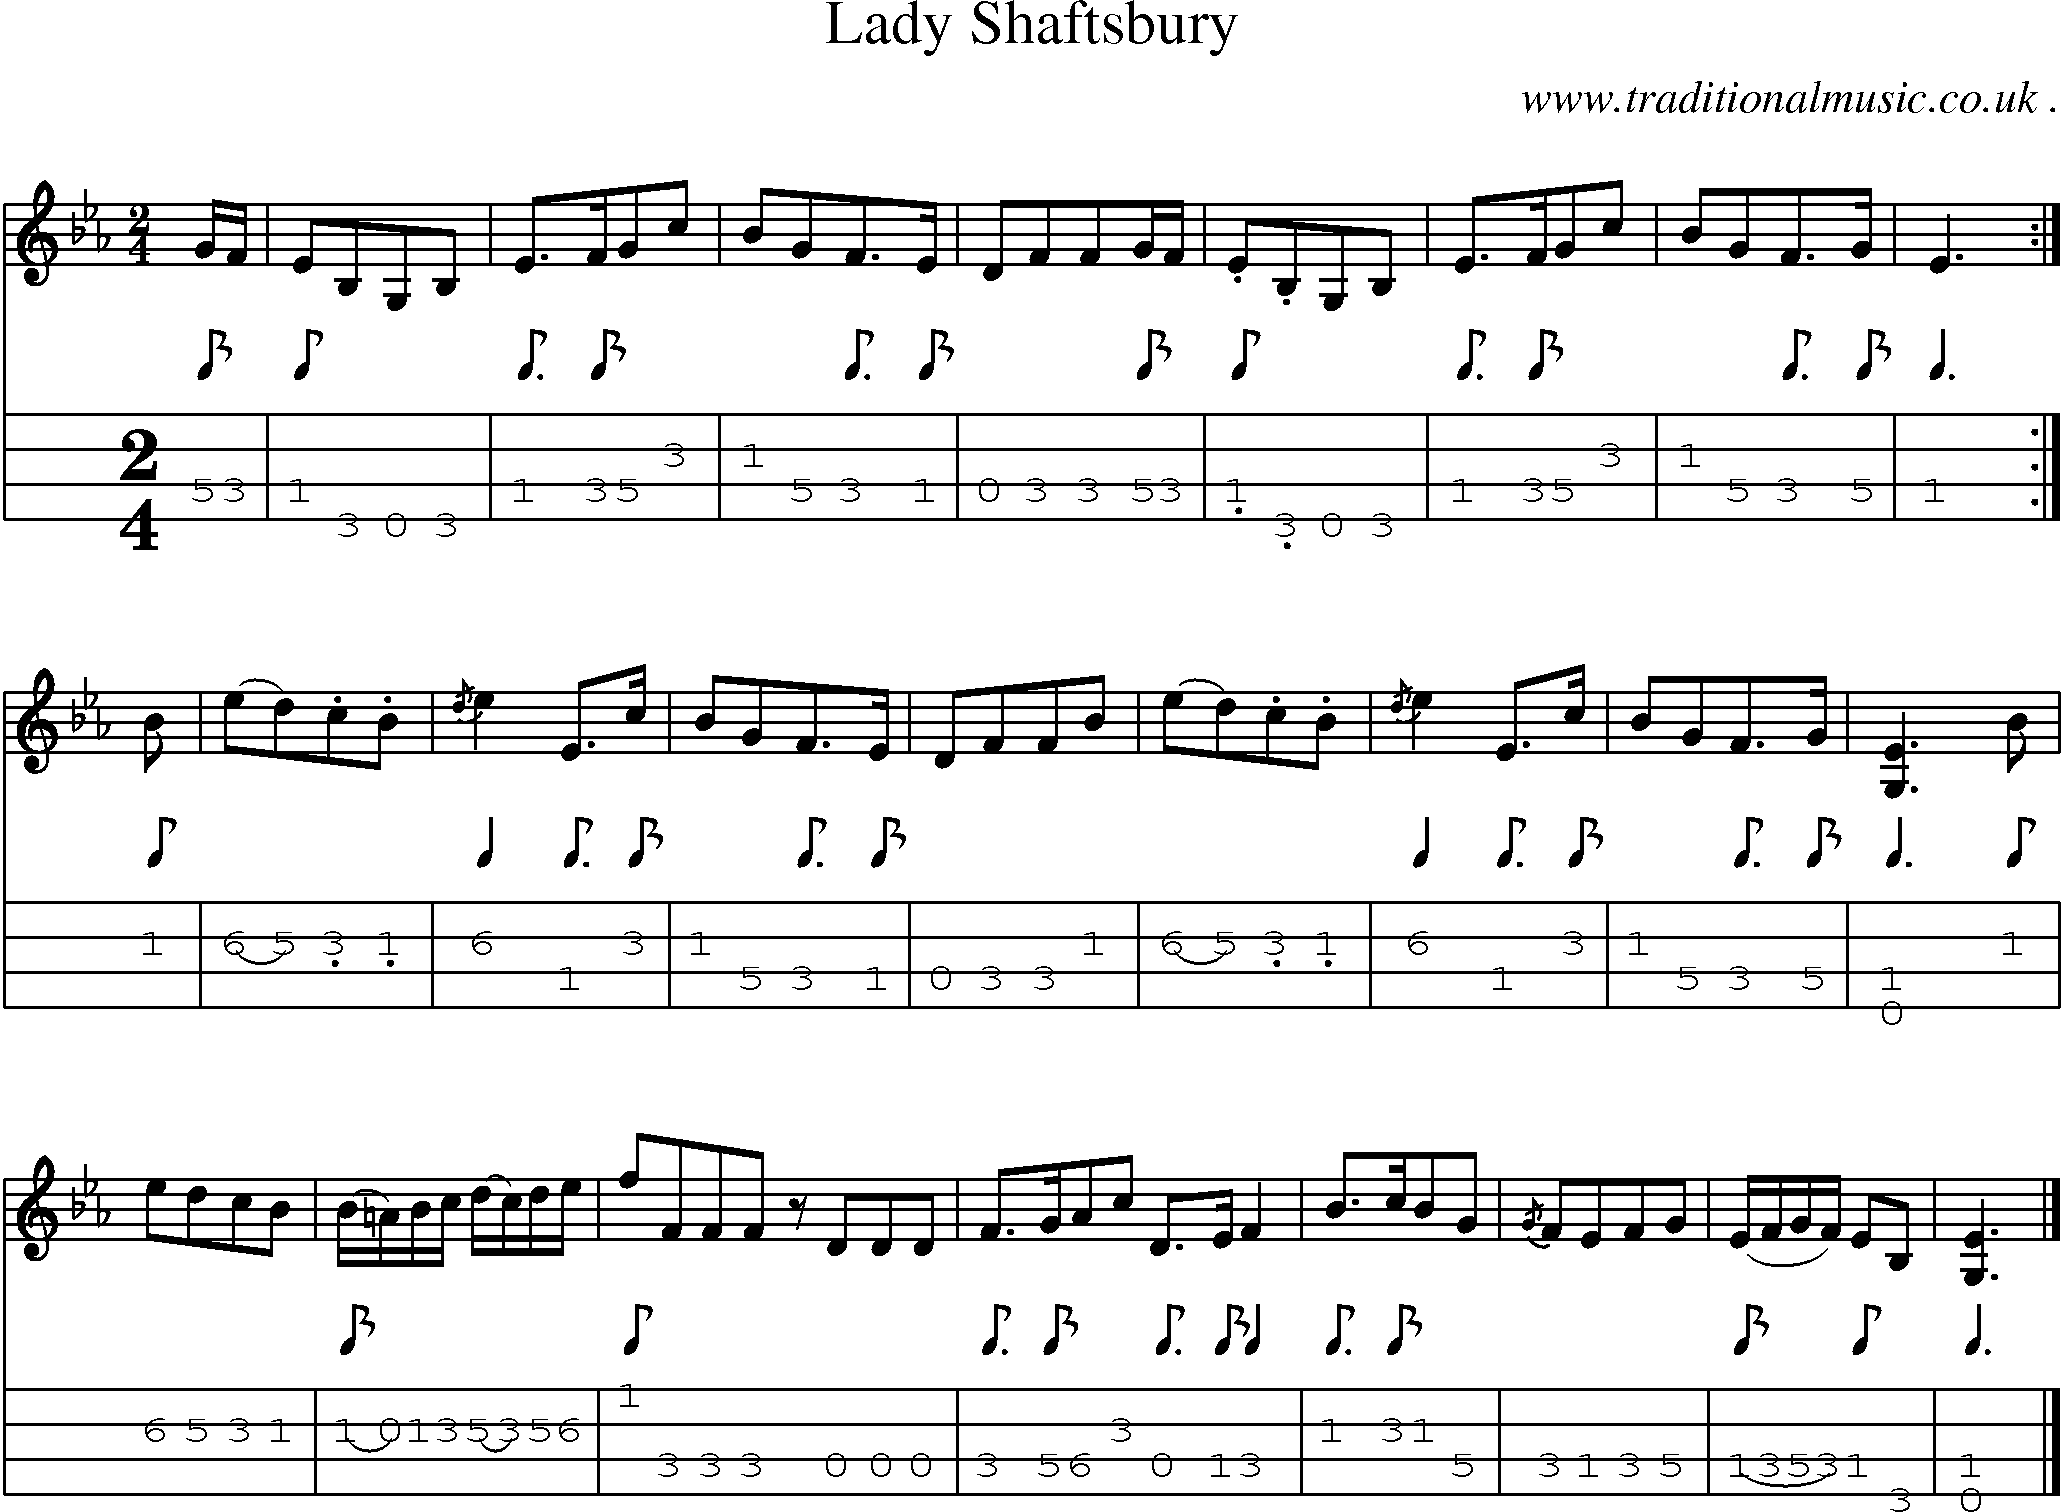 Sheet-music  score, Chords and Mandolin Tabs for Lady Shaftsbury